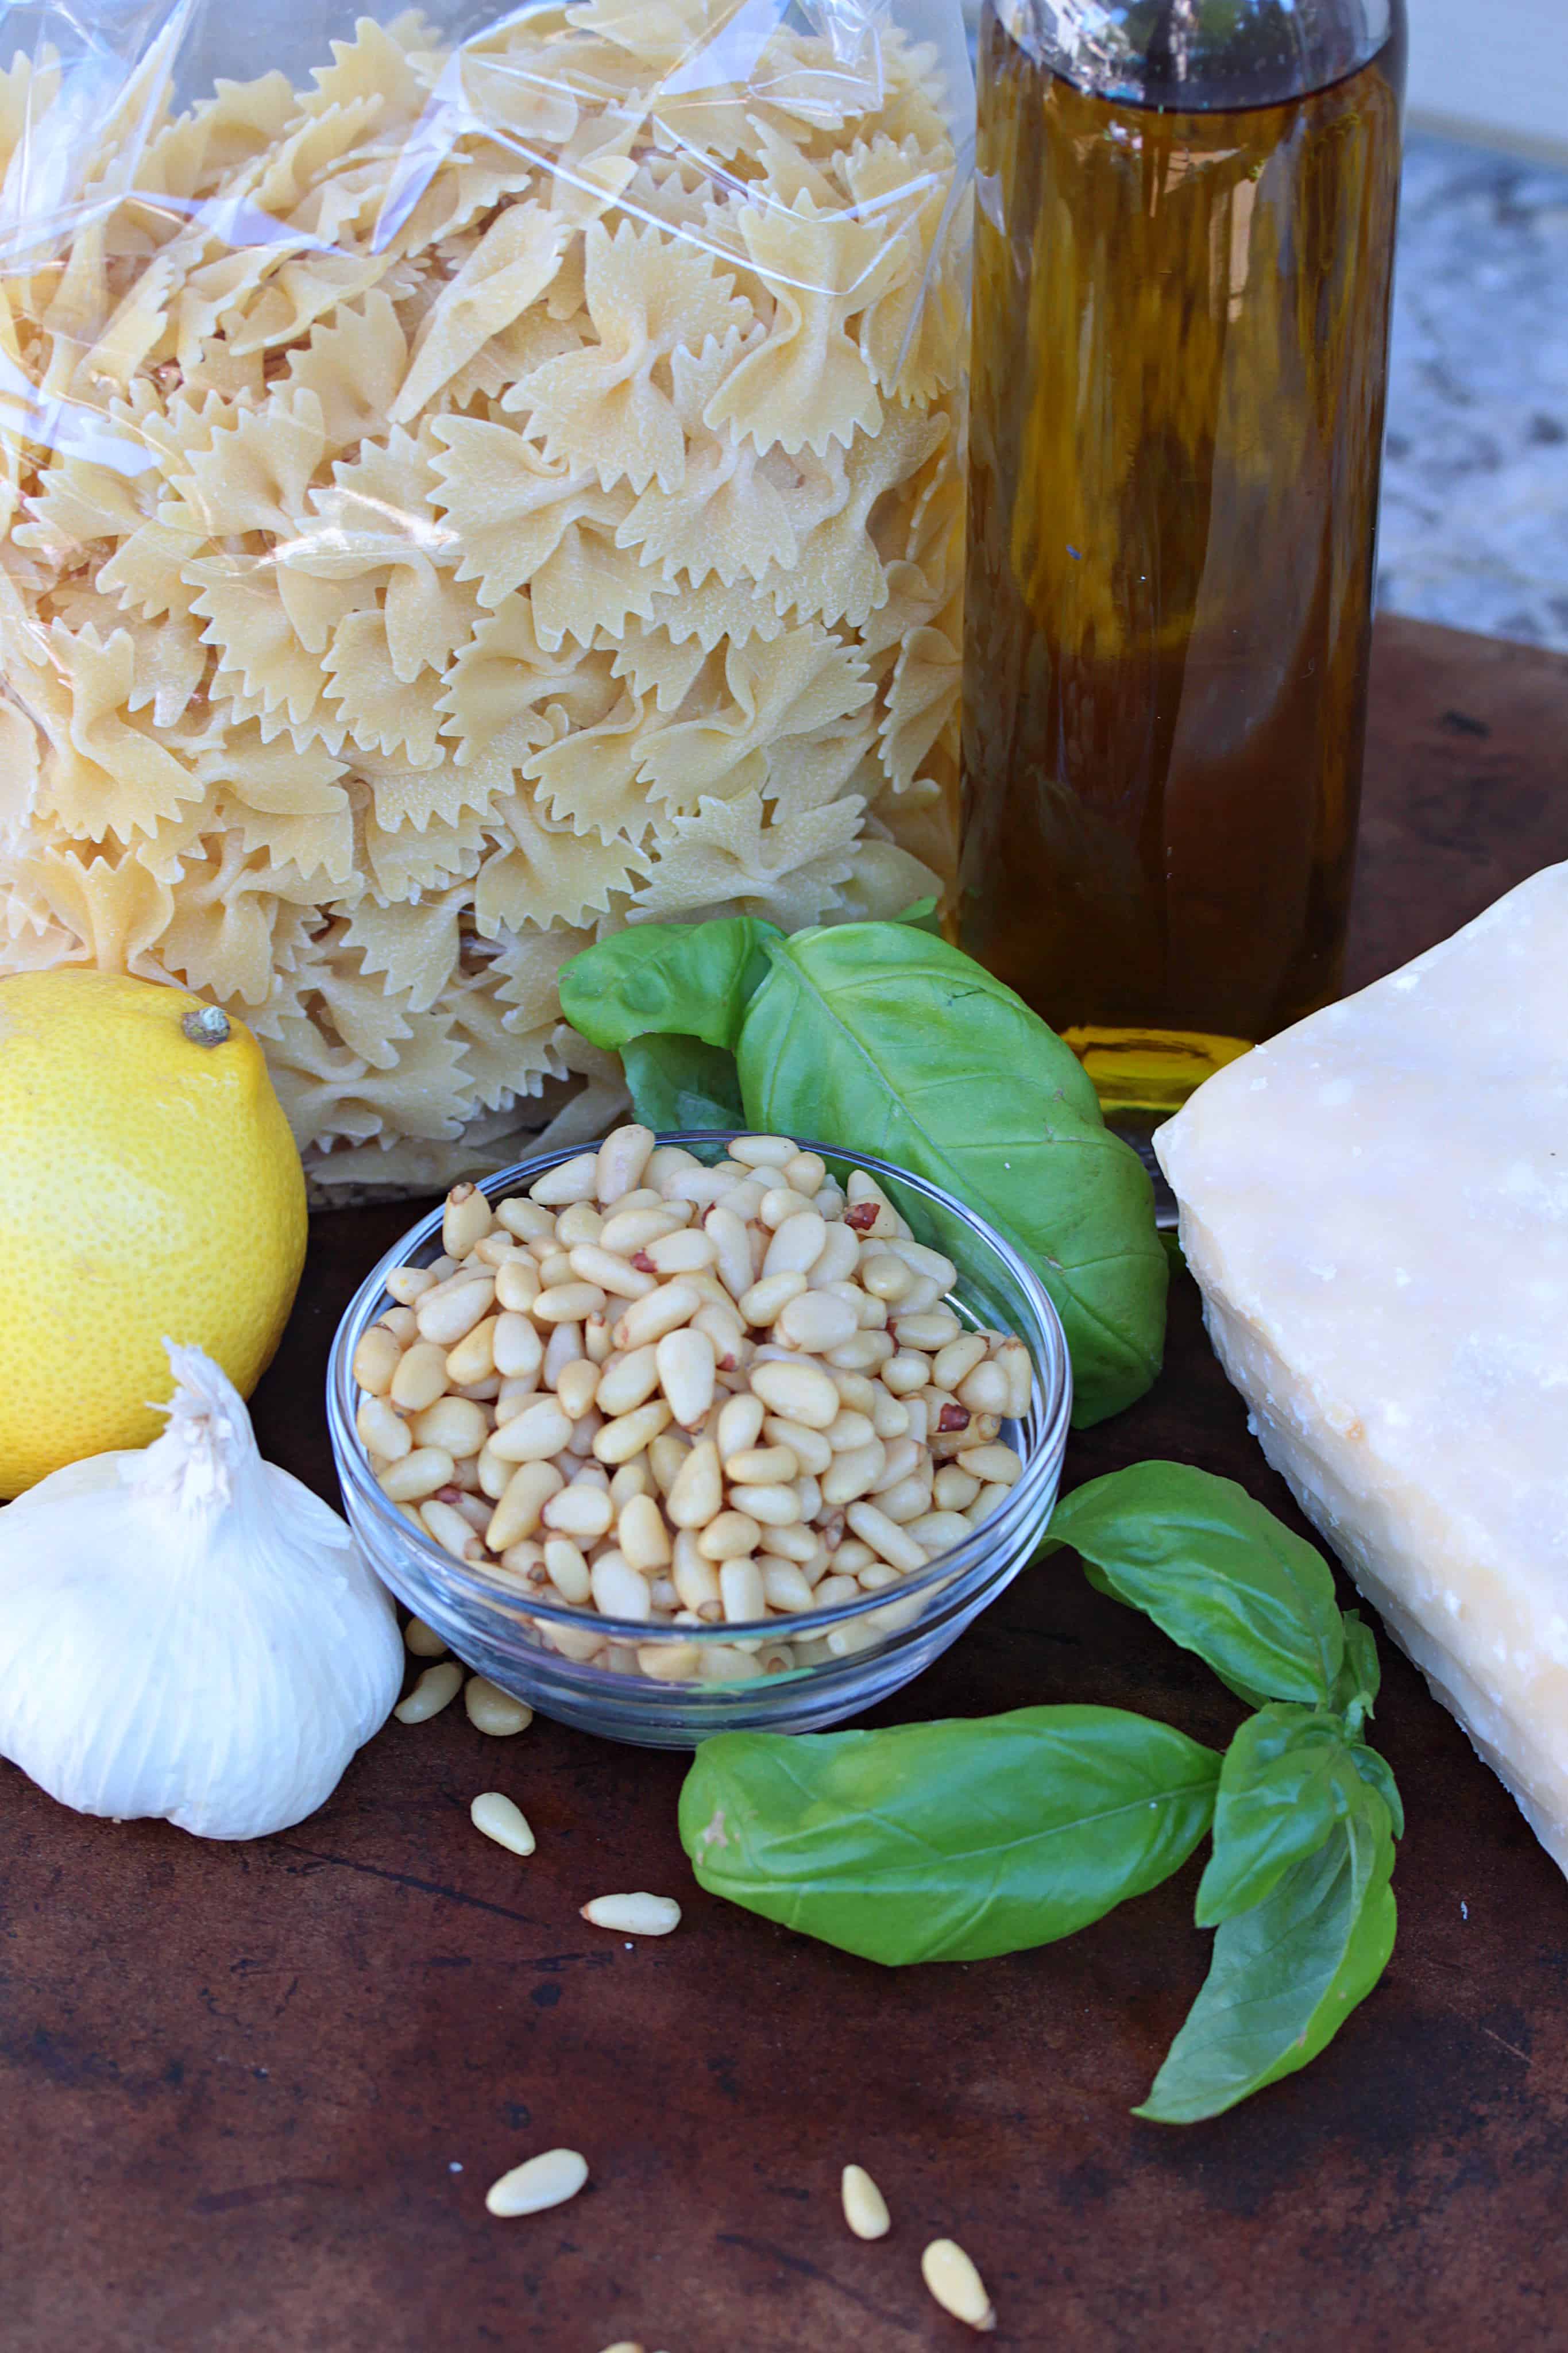 Ingredients for Bow Tie Pesto Pasta salad including olive oil, bow tie pasta, pine nuts, basil, parmesan, garlic and lemon